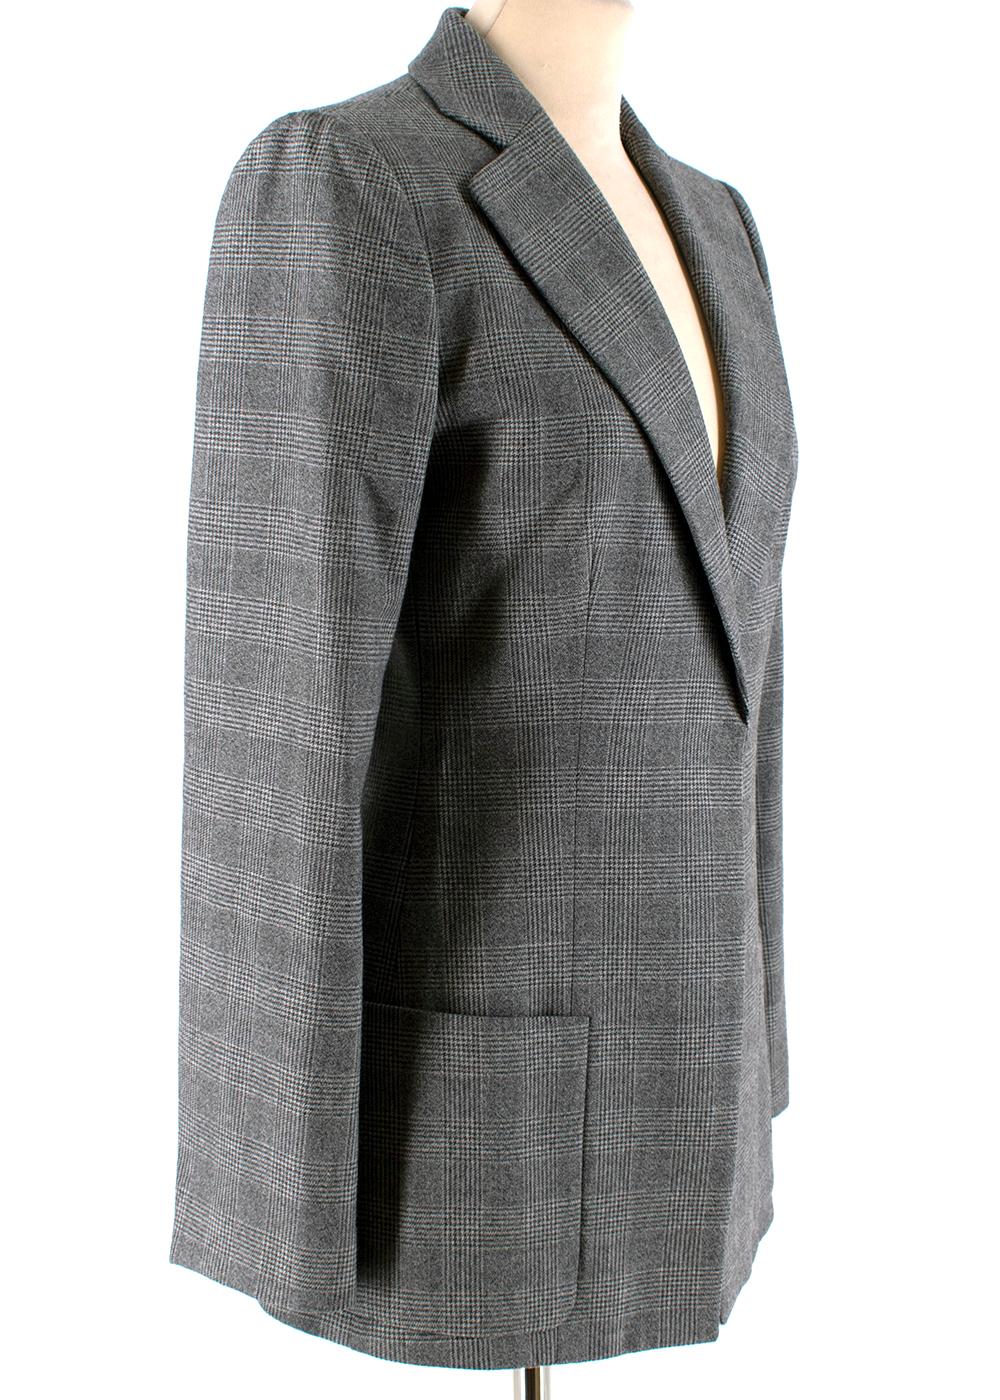 Giorgio Armani Grey Checkered Wool Single Breasted Blazer Jacket

-Made of soft textured wool 
-Gorgeous Prince of Wales checkered pattern 
-Grey neutral hues 
-Classic single breasted cut 
-Pockets to the front 
-Fully lined 
-Button fastening to